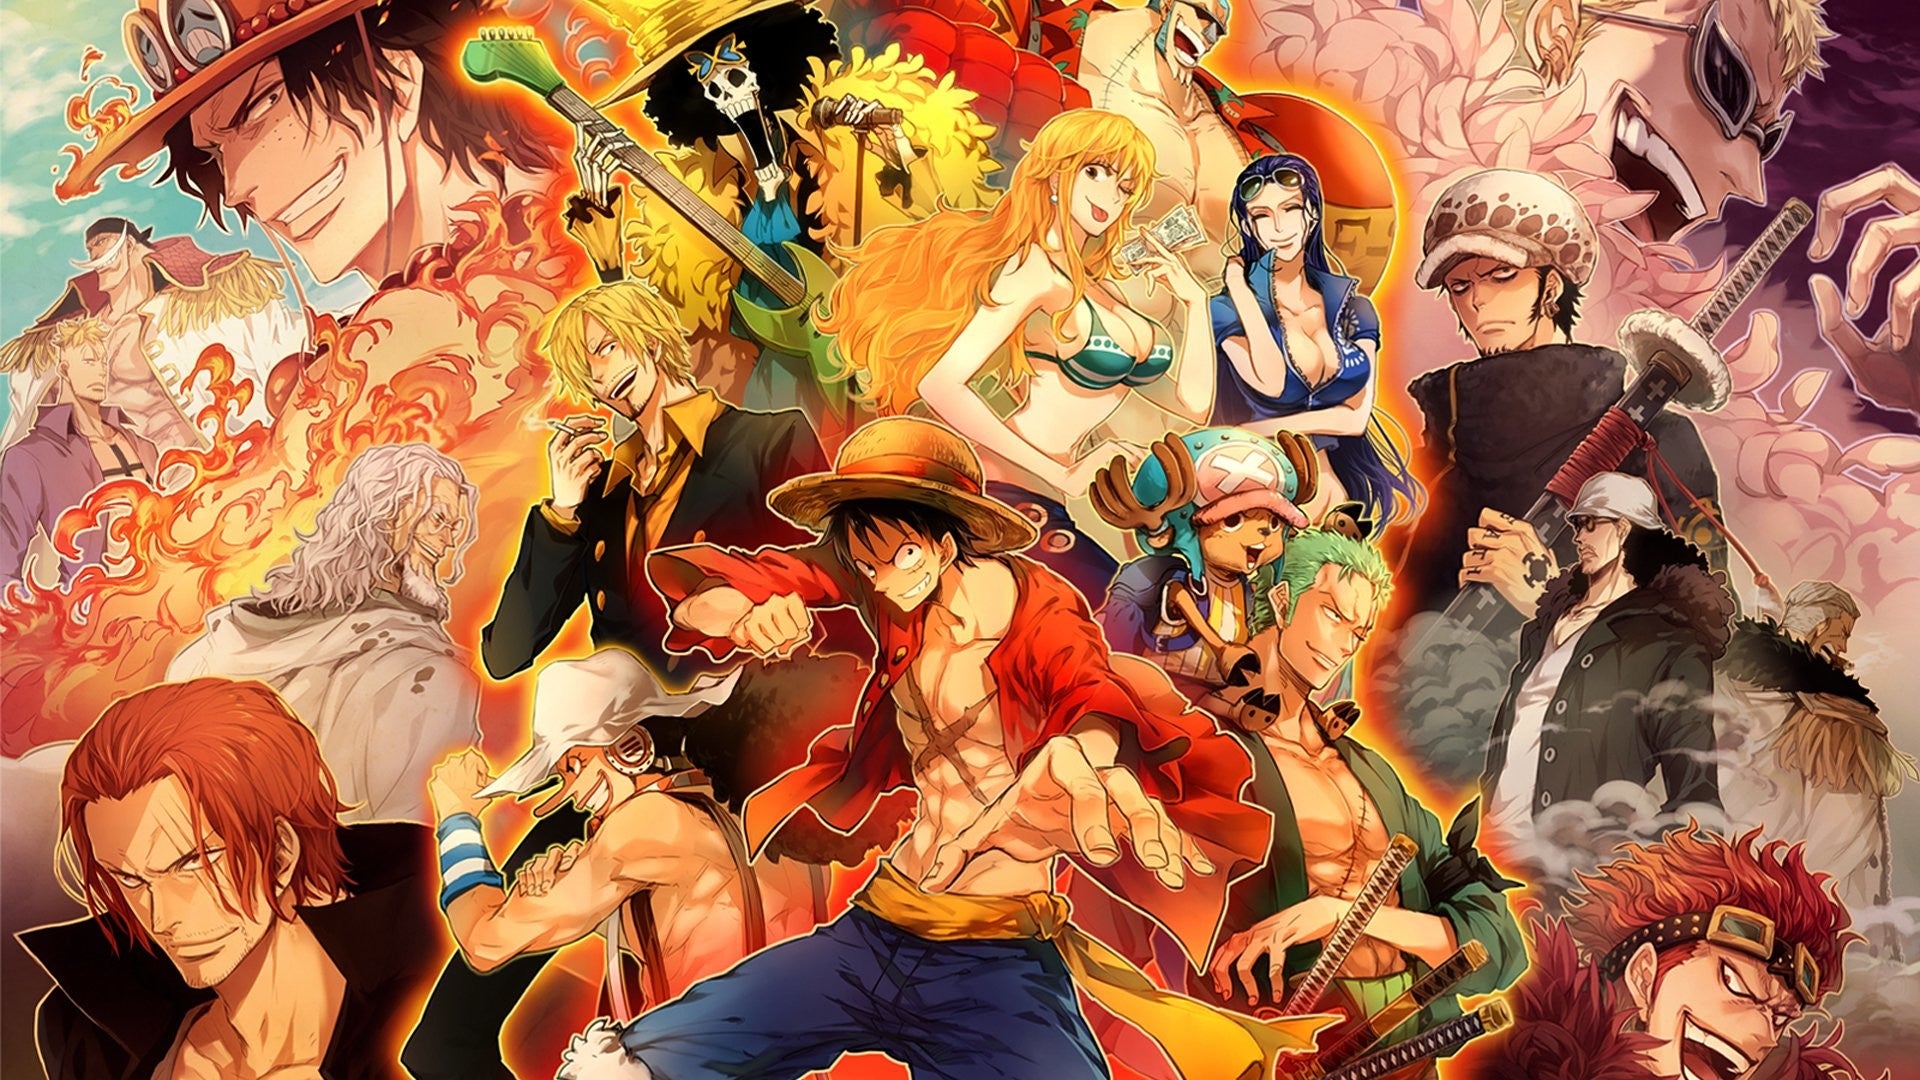 Haven't watched the One Piece yet? Here's everything you need to know before diving into the Pirate's Escapades.